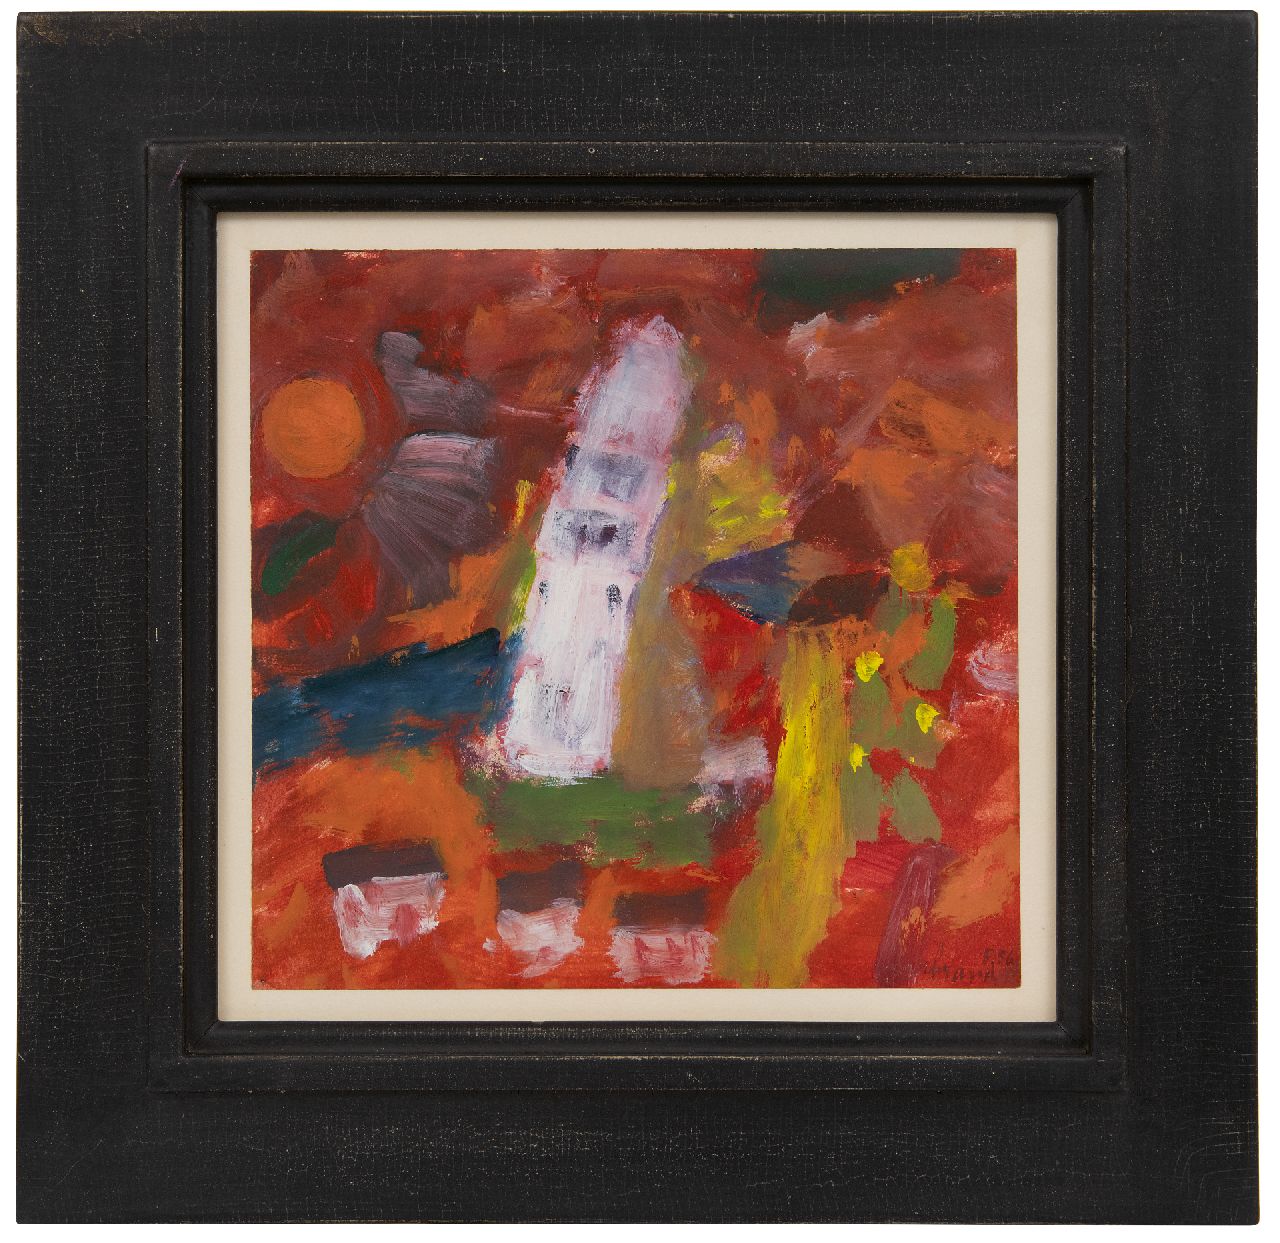 Brands E.A.M.  | Eugenius Antonius Maria 'Eugène' Brands | Paintings offered for sale | Toren in landschap (Tower in landscape), oil on paper 21.5 x 22.5 cm, signed l.r. and dated 5.56